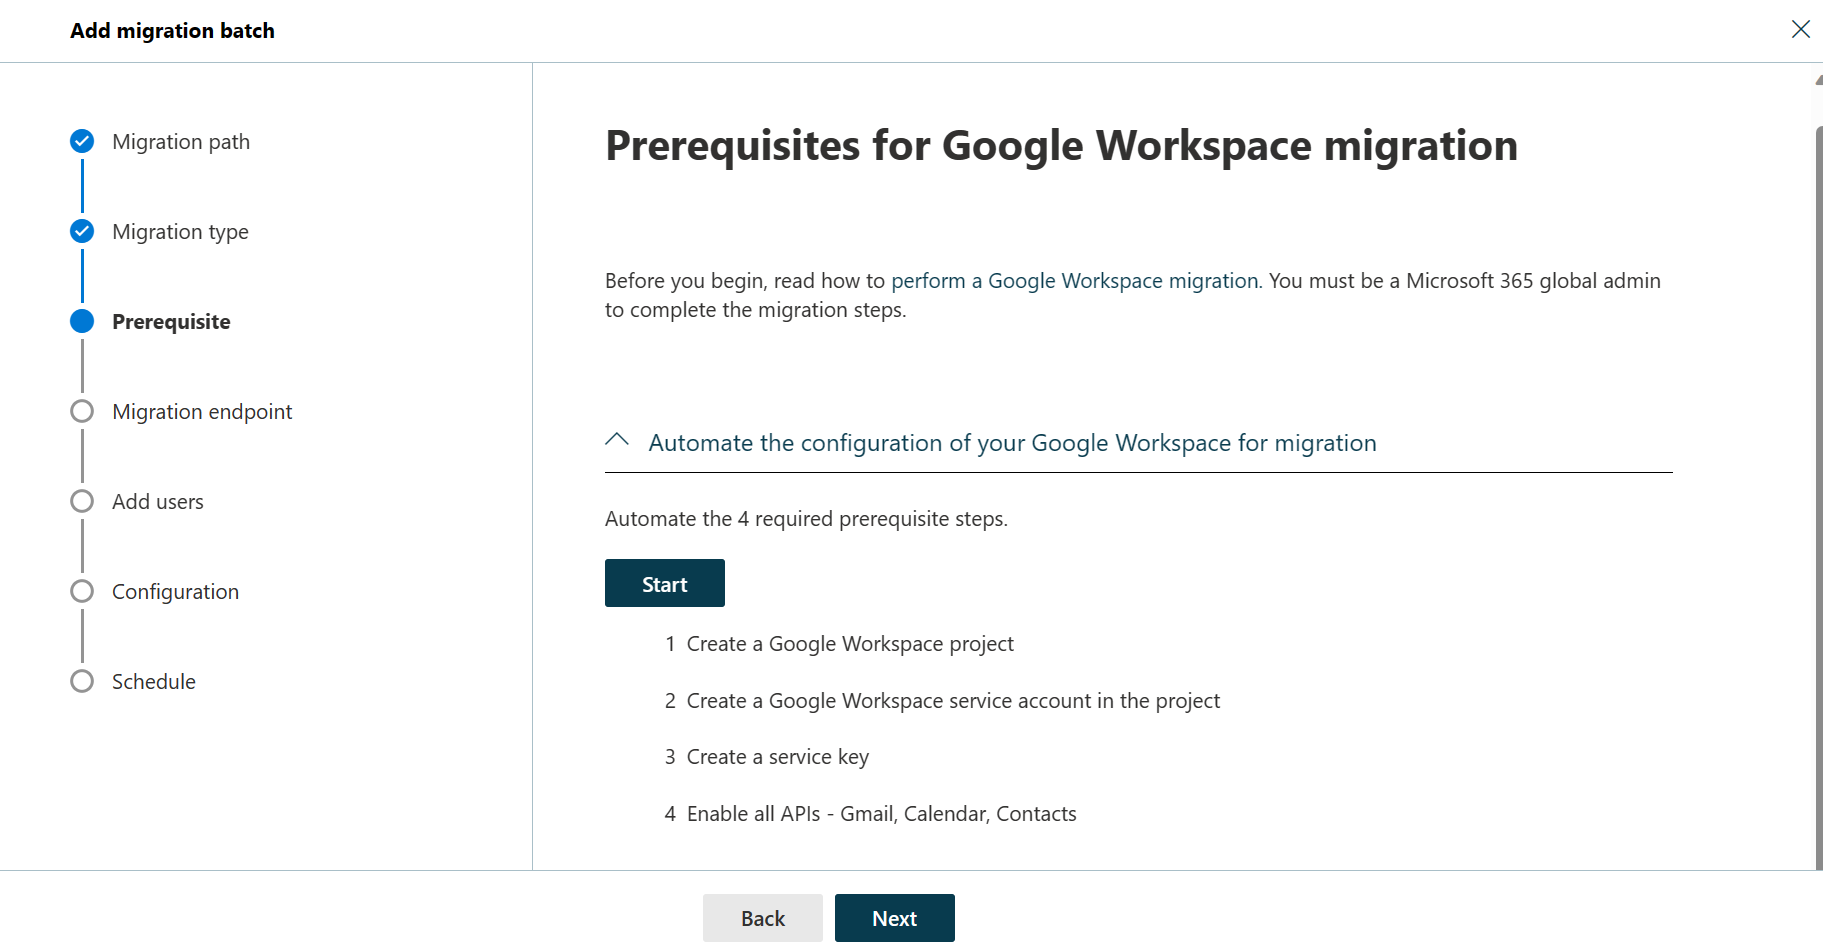 Screenshot of the Prerequisites for Google Workspace Migration dialog showing a list of configuration steps and the start button that will automate the process.